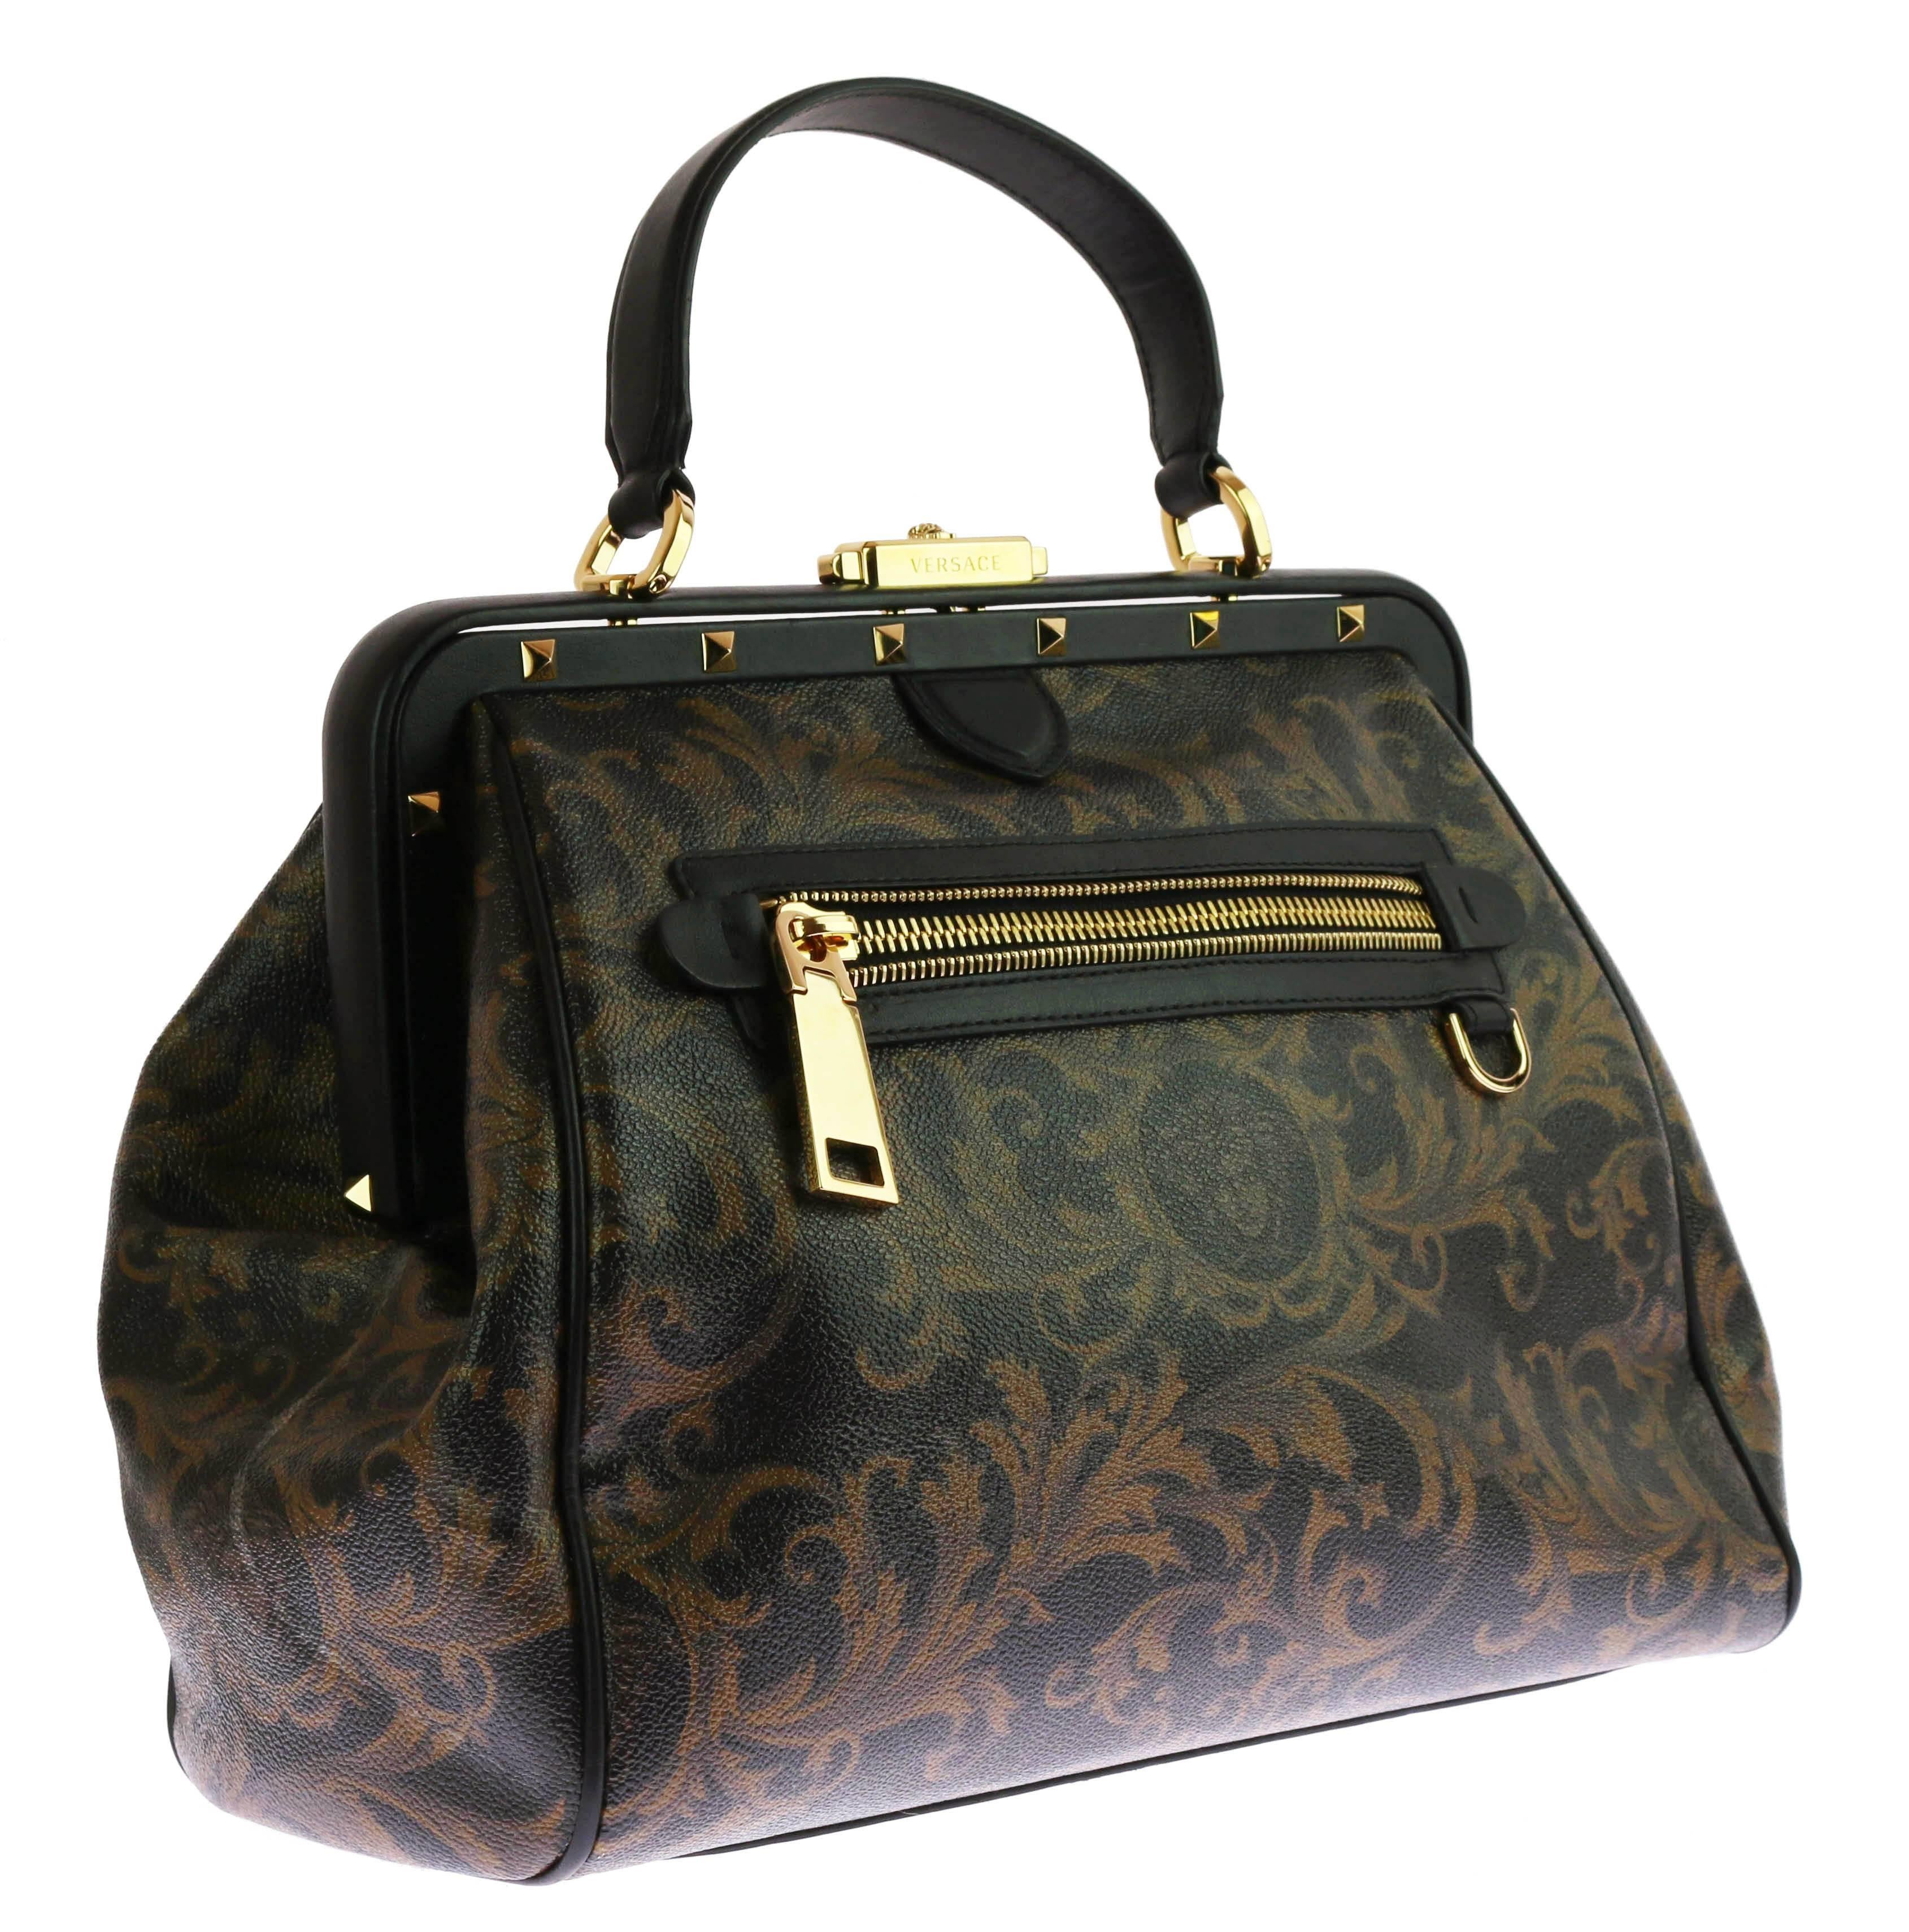 VERSACE

This Versace doctor bag features iconic barocco print

a detachable shoulder strap with lobster claw clasps, 

a detachable gold tone chain,

functional exposed zip, studded trim and four protective metal feet.

Interior features